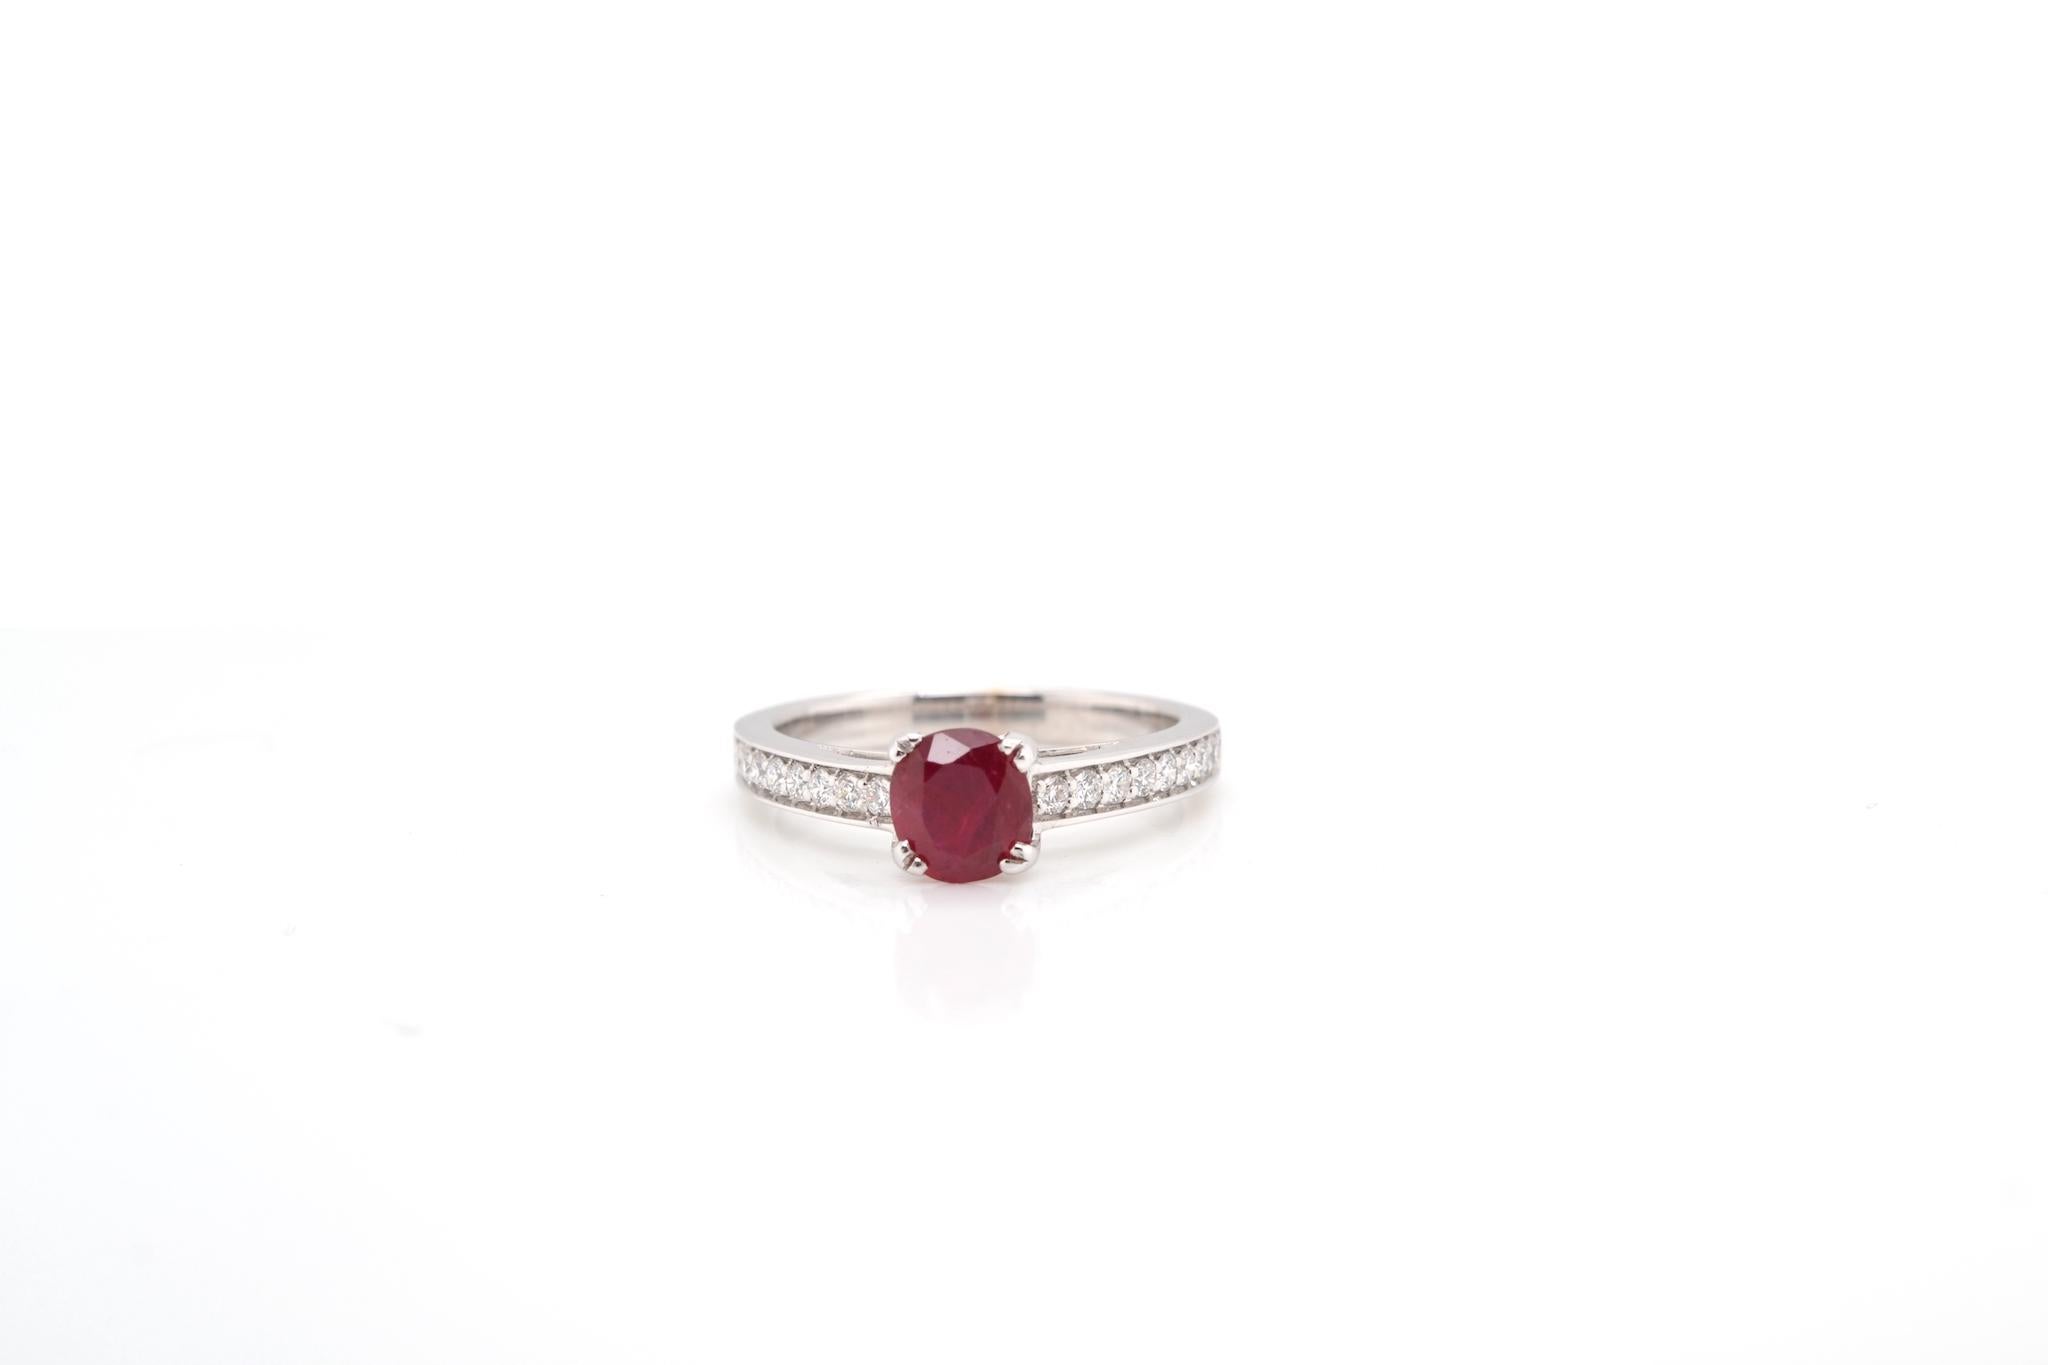 Stones: 1.50 carats ruby and diamonds
brilliant cuts for a total weight of 0.20 carat.
Material: 18k white gold
Dimensions: 6 mm length on finger
Weight: 3.9g
Size: 53 (free sizing)
Certificate
Ref. : 20342